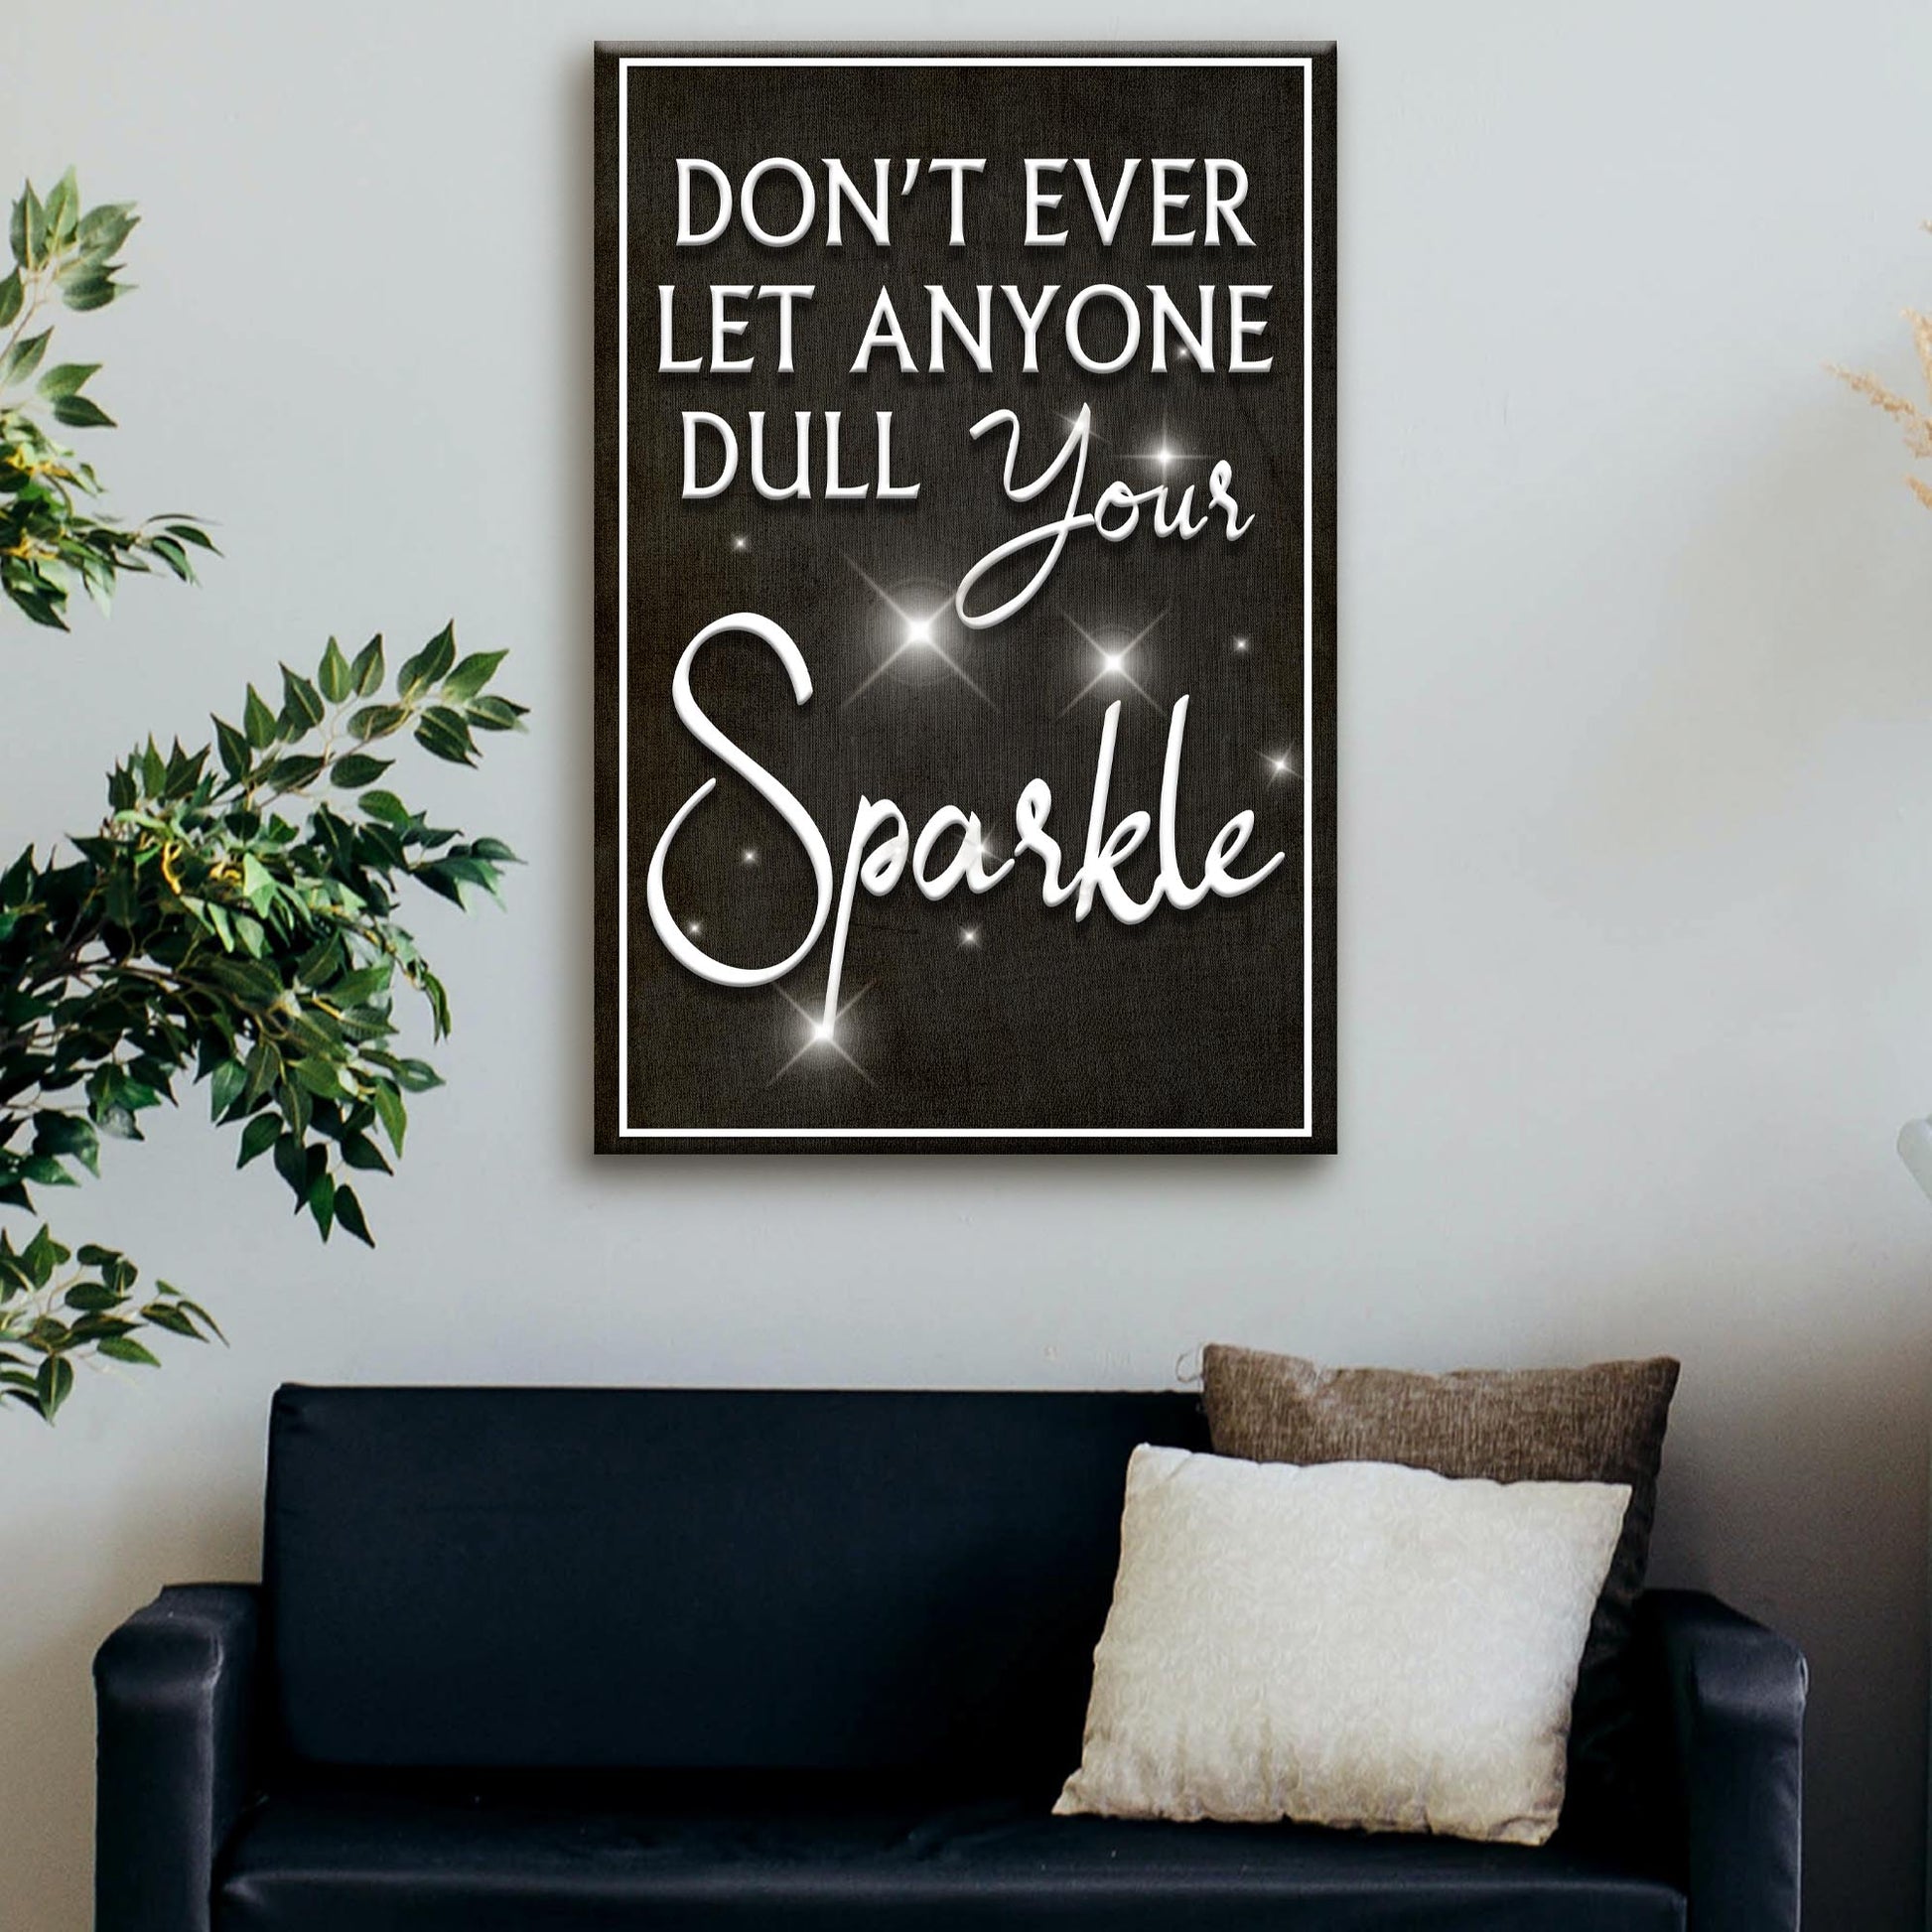 Don't Ever Let Anyone Dull Your Sparkle Sign II - Image by Tailored Canvases